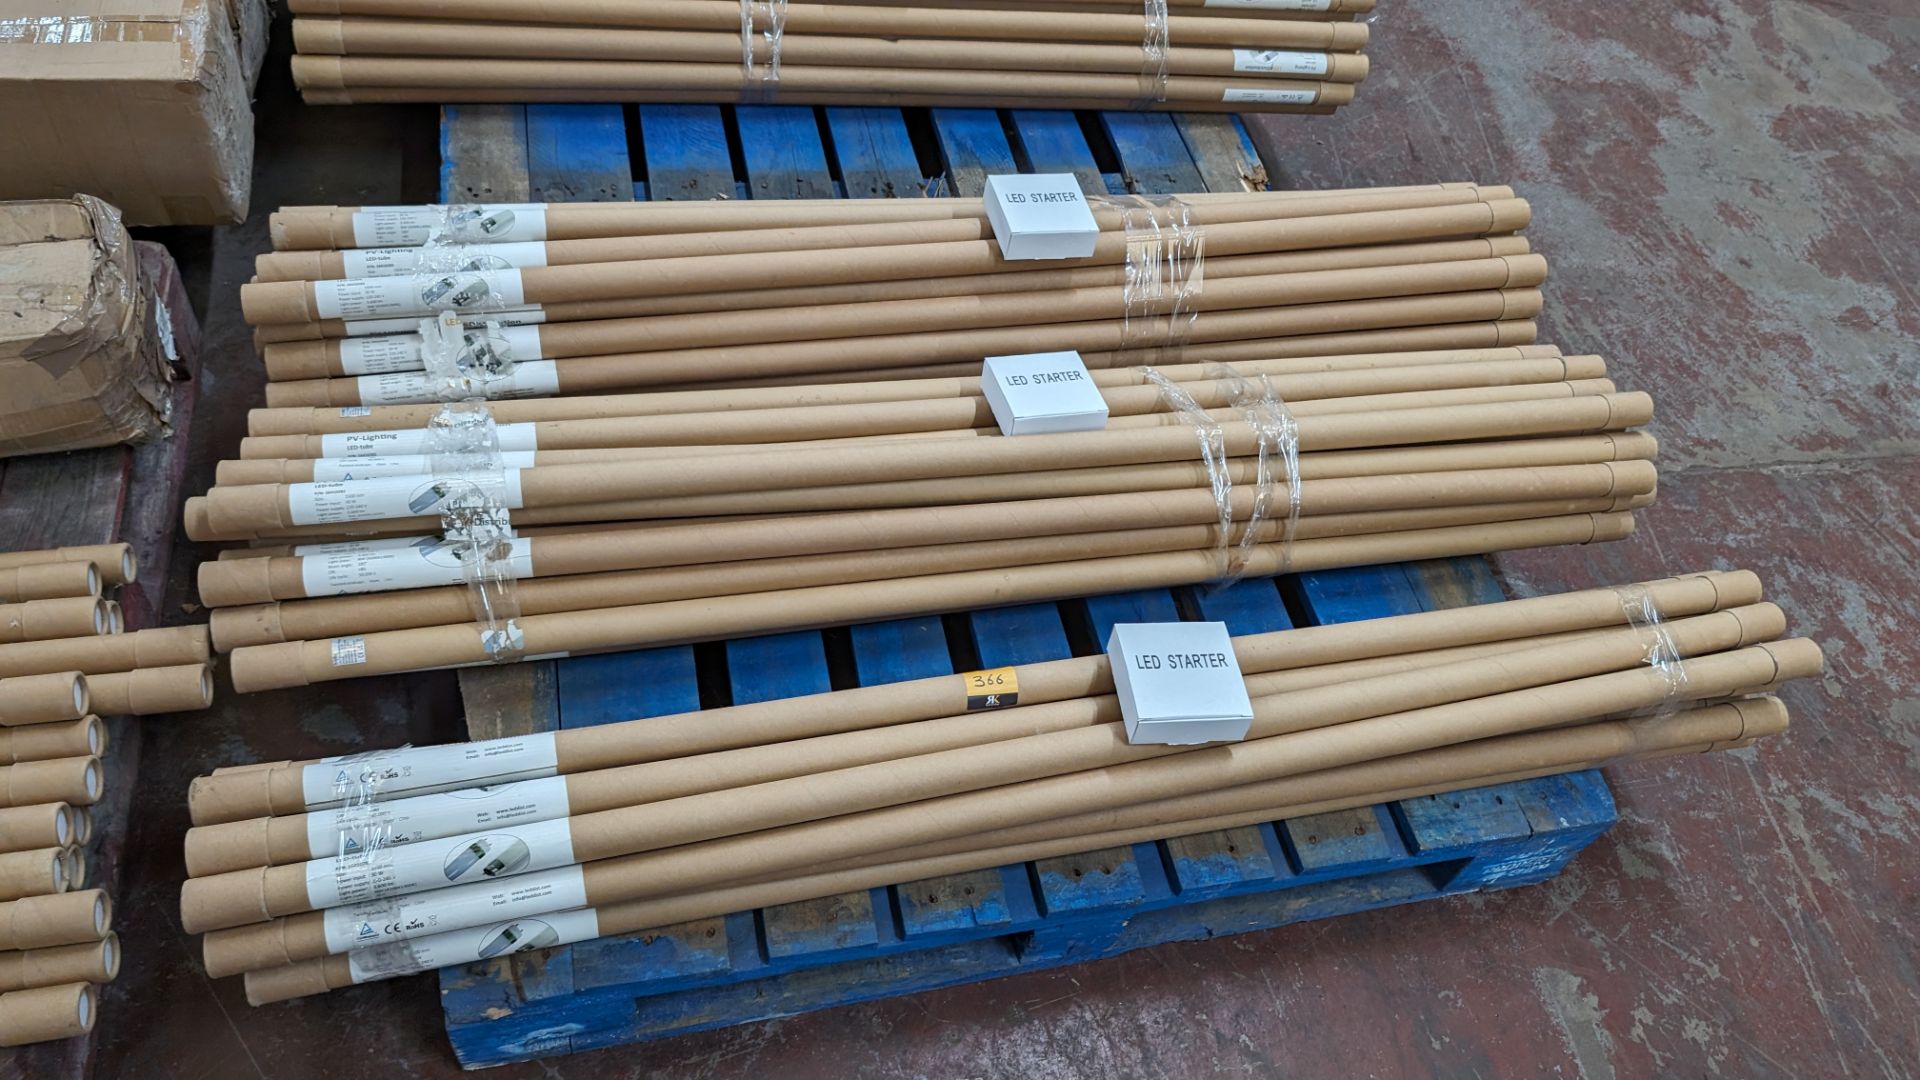 The contents of a pallet of 1500mm 30w 3600 lumens LED lighting tubes, 50,000 hours. Approximately